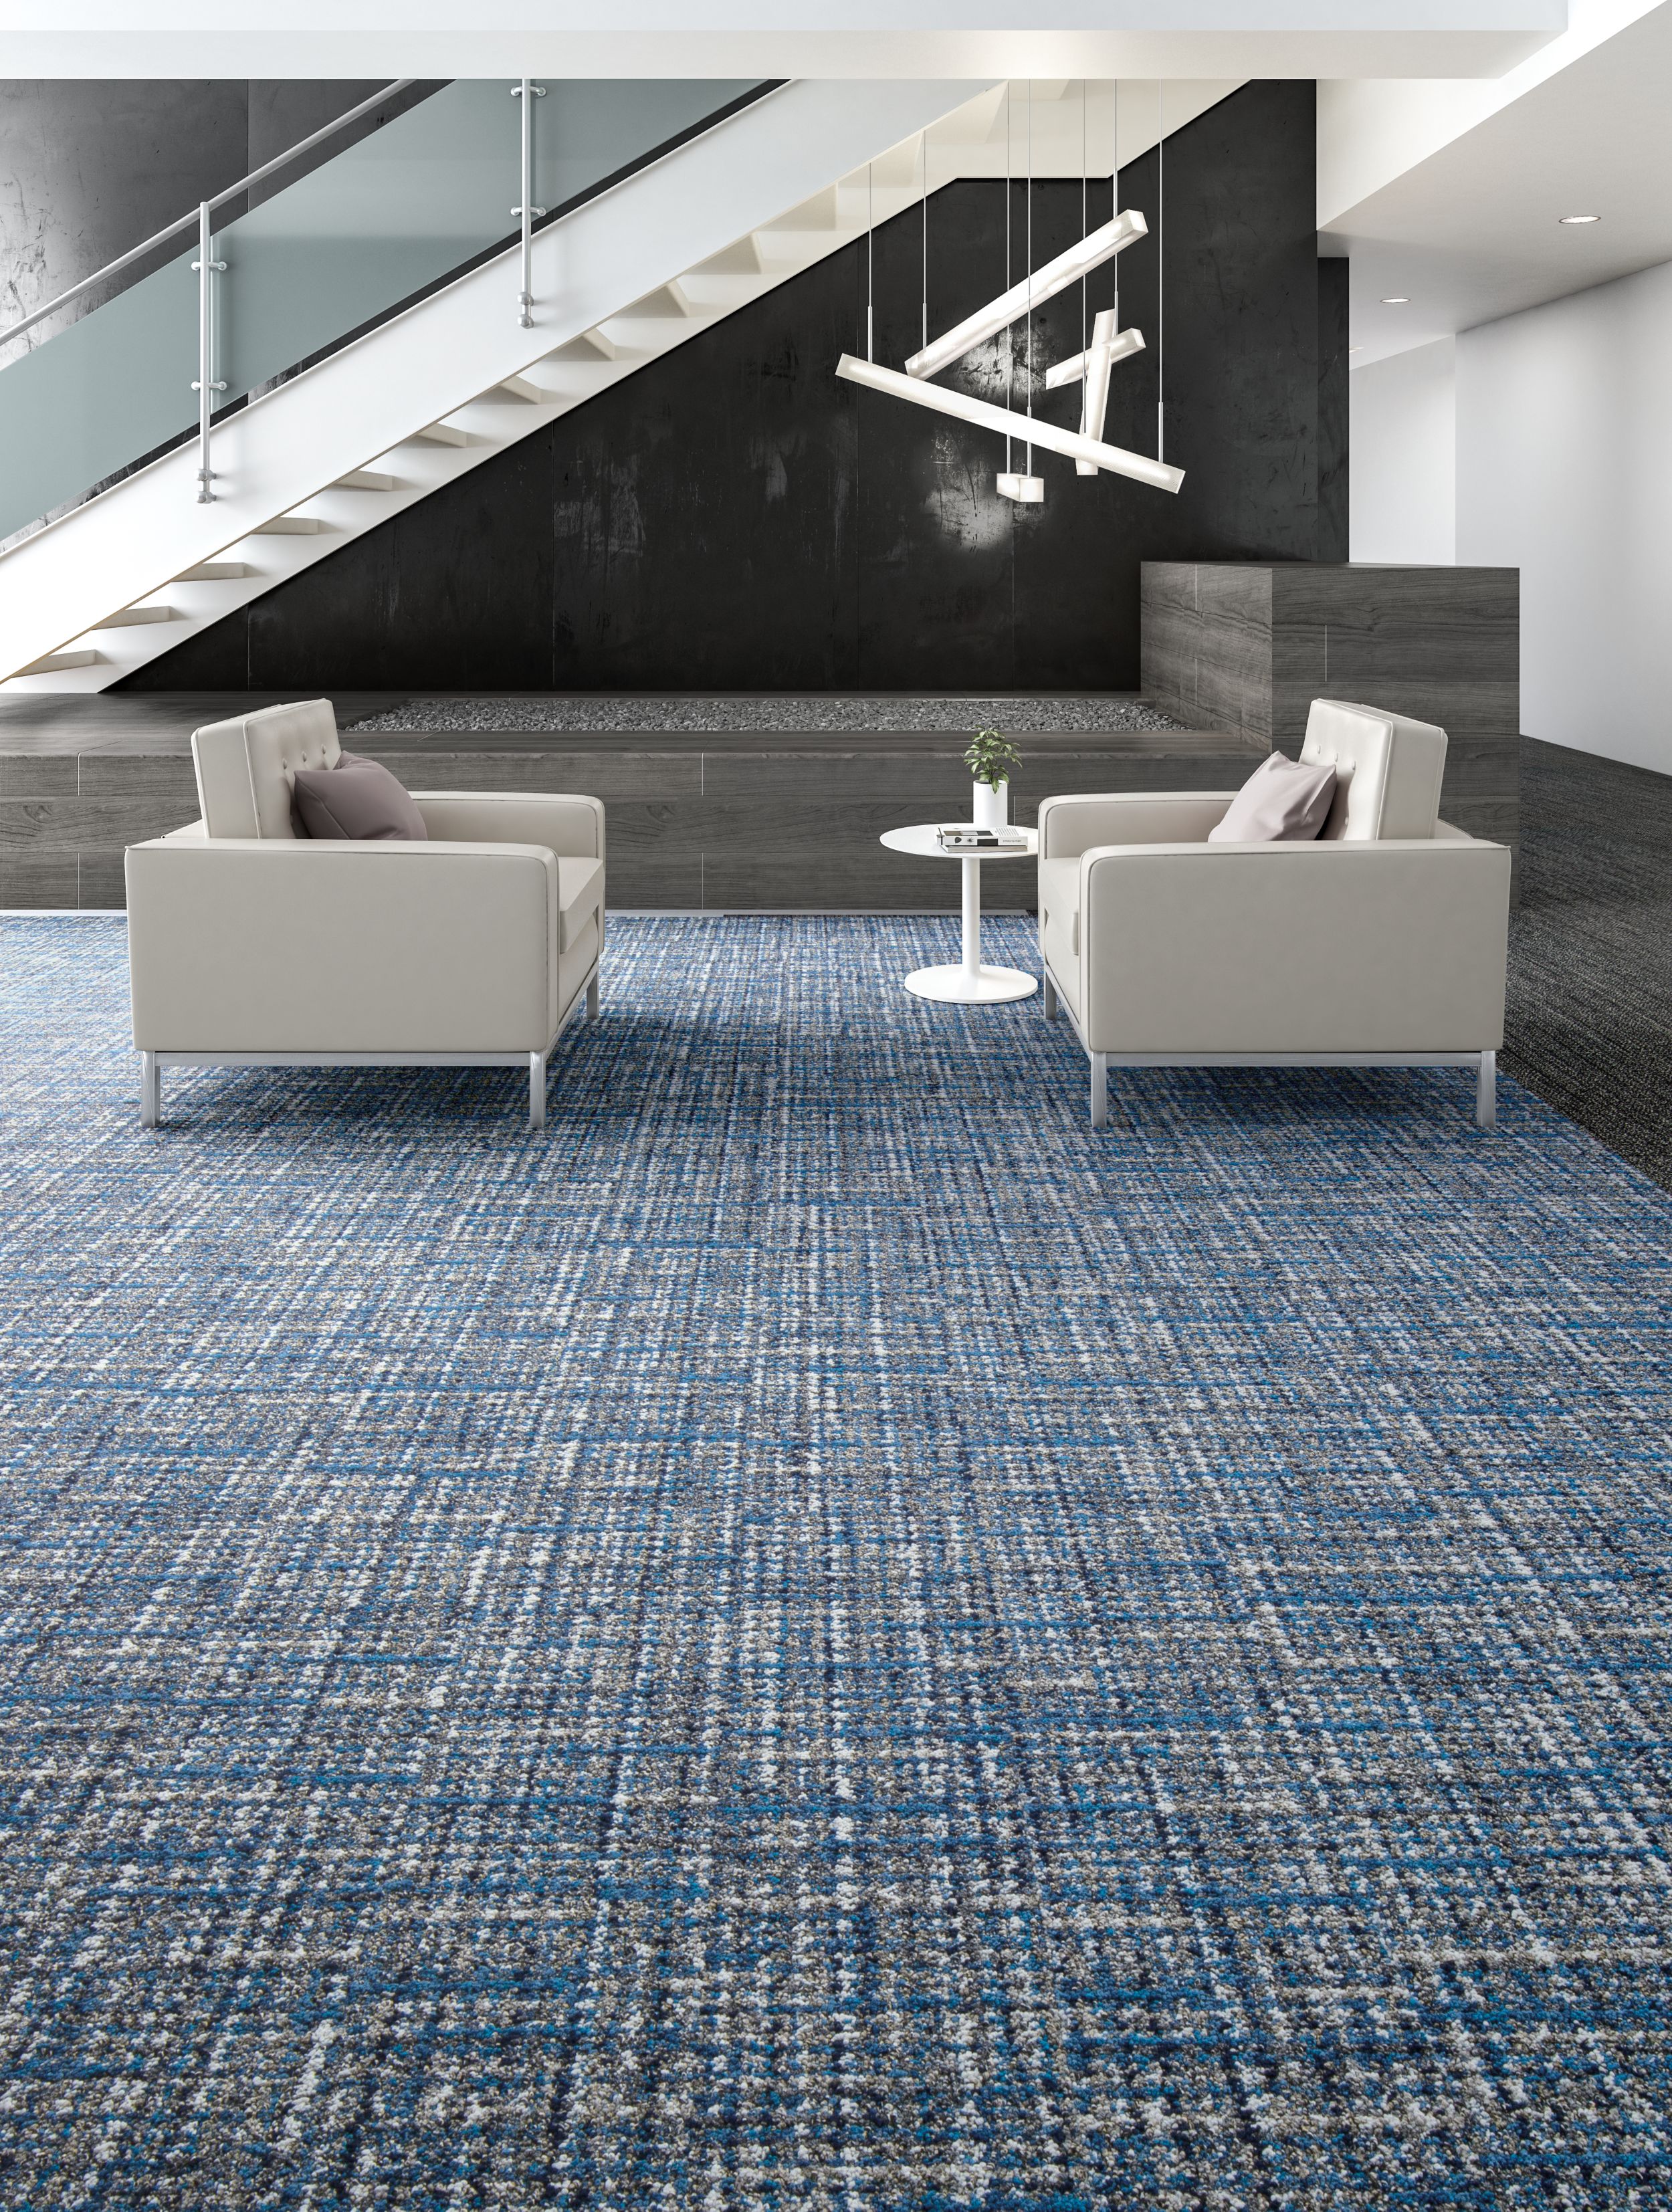 image Interface WW895 plank carpet tile in lobby area with couches and side table  numéro 7